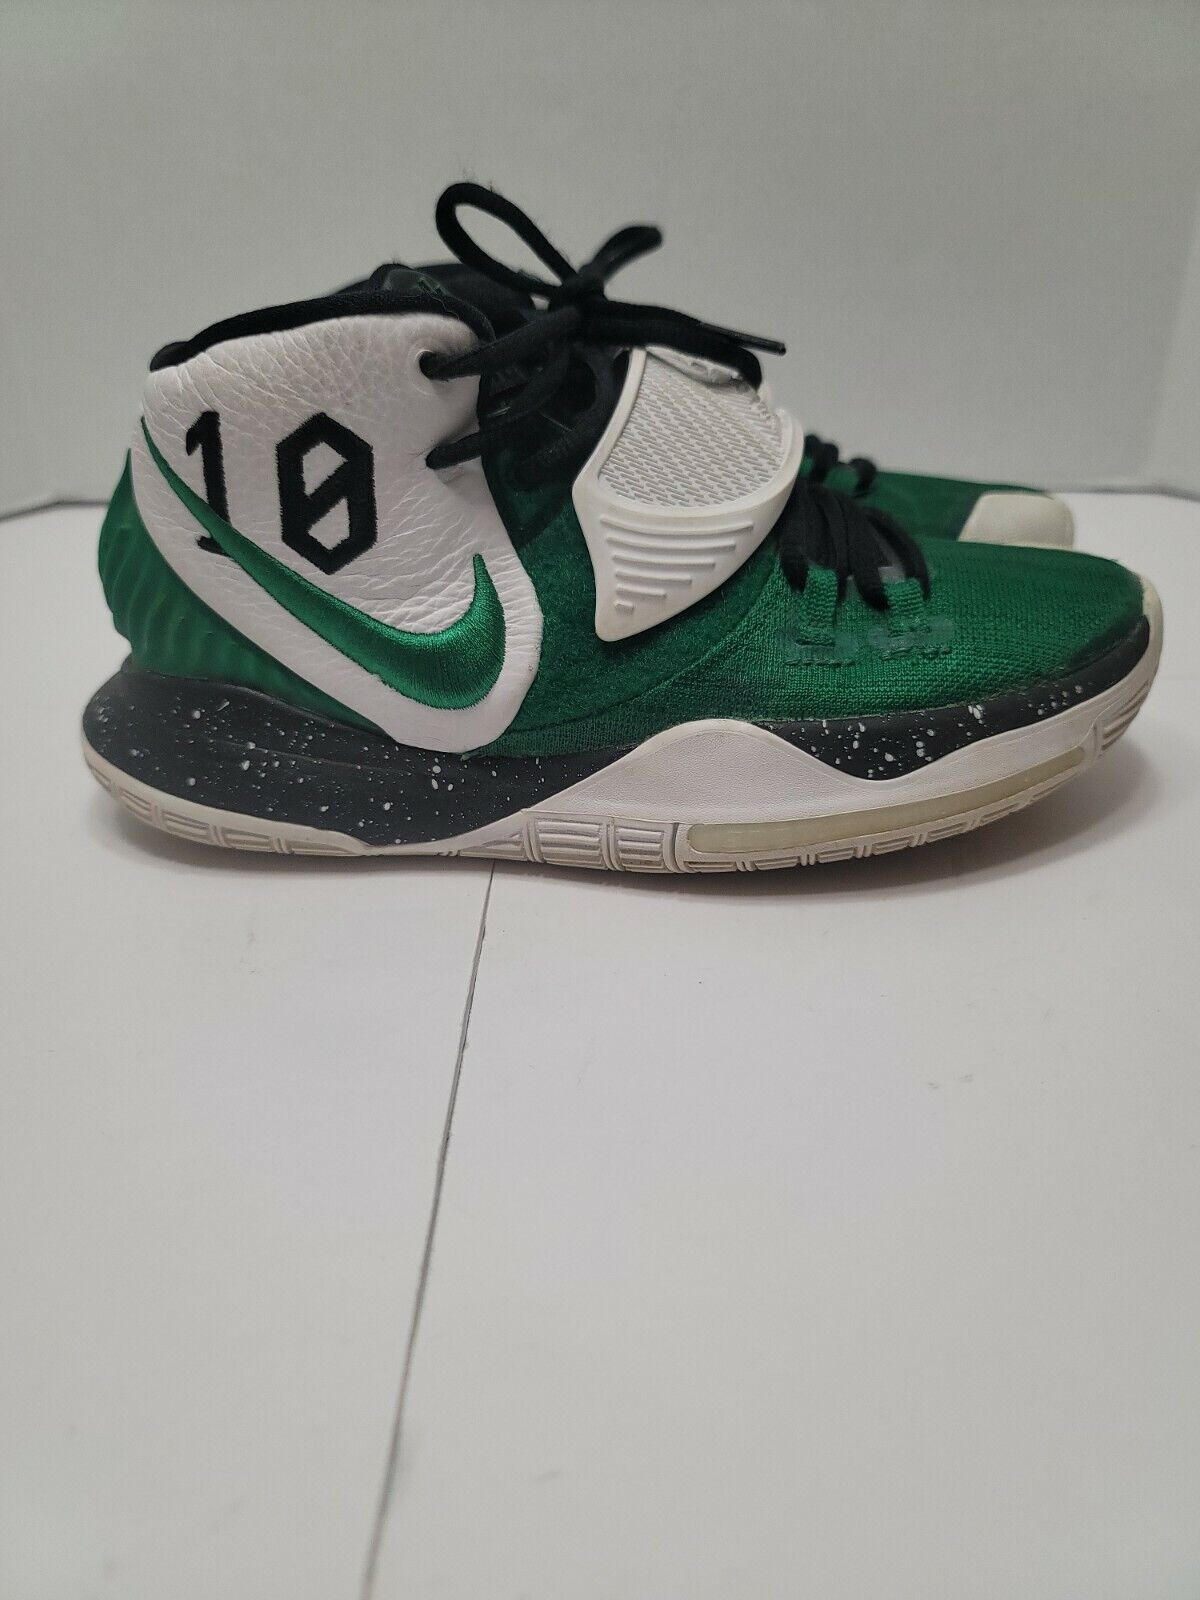 KYRIE 6 Nike By You Shoes, CT1019-991 Black White Green, Size 5, Custom #10